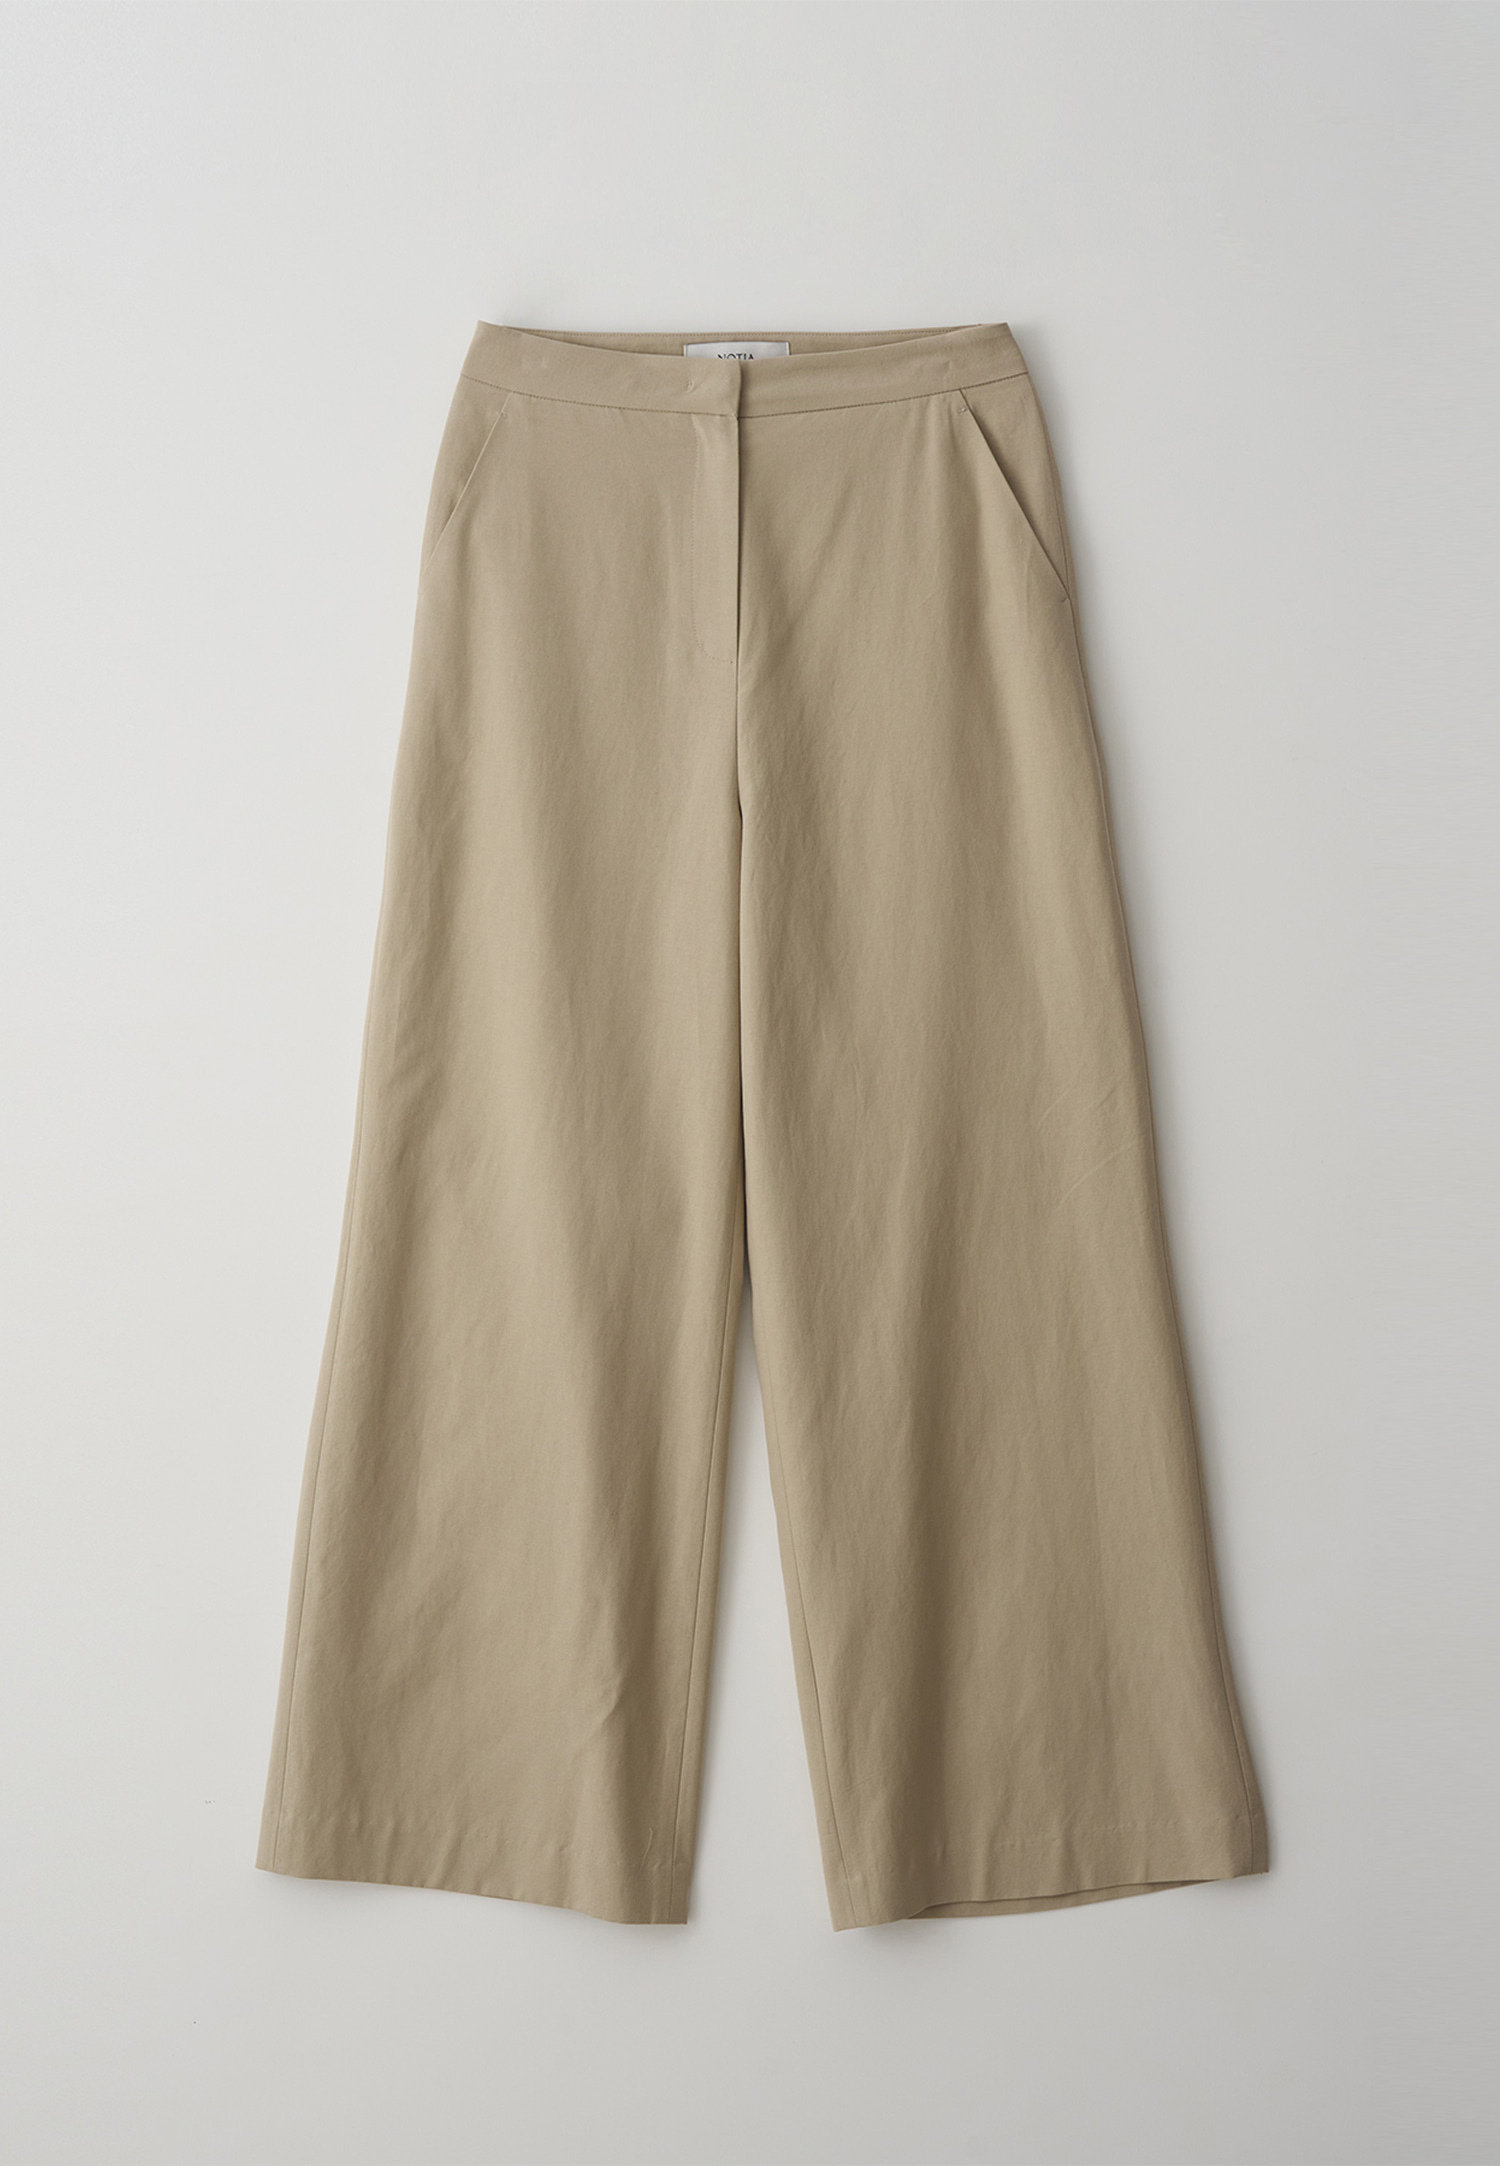 RELAXED FIT COTTON PANTS - BEIGE